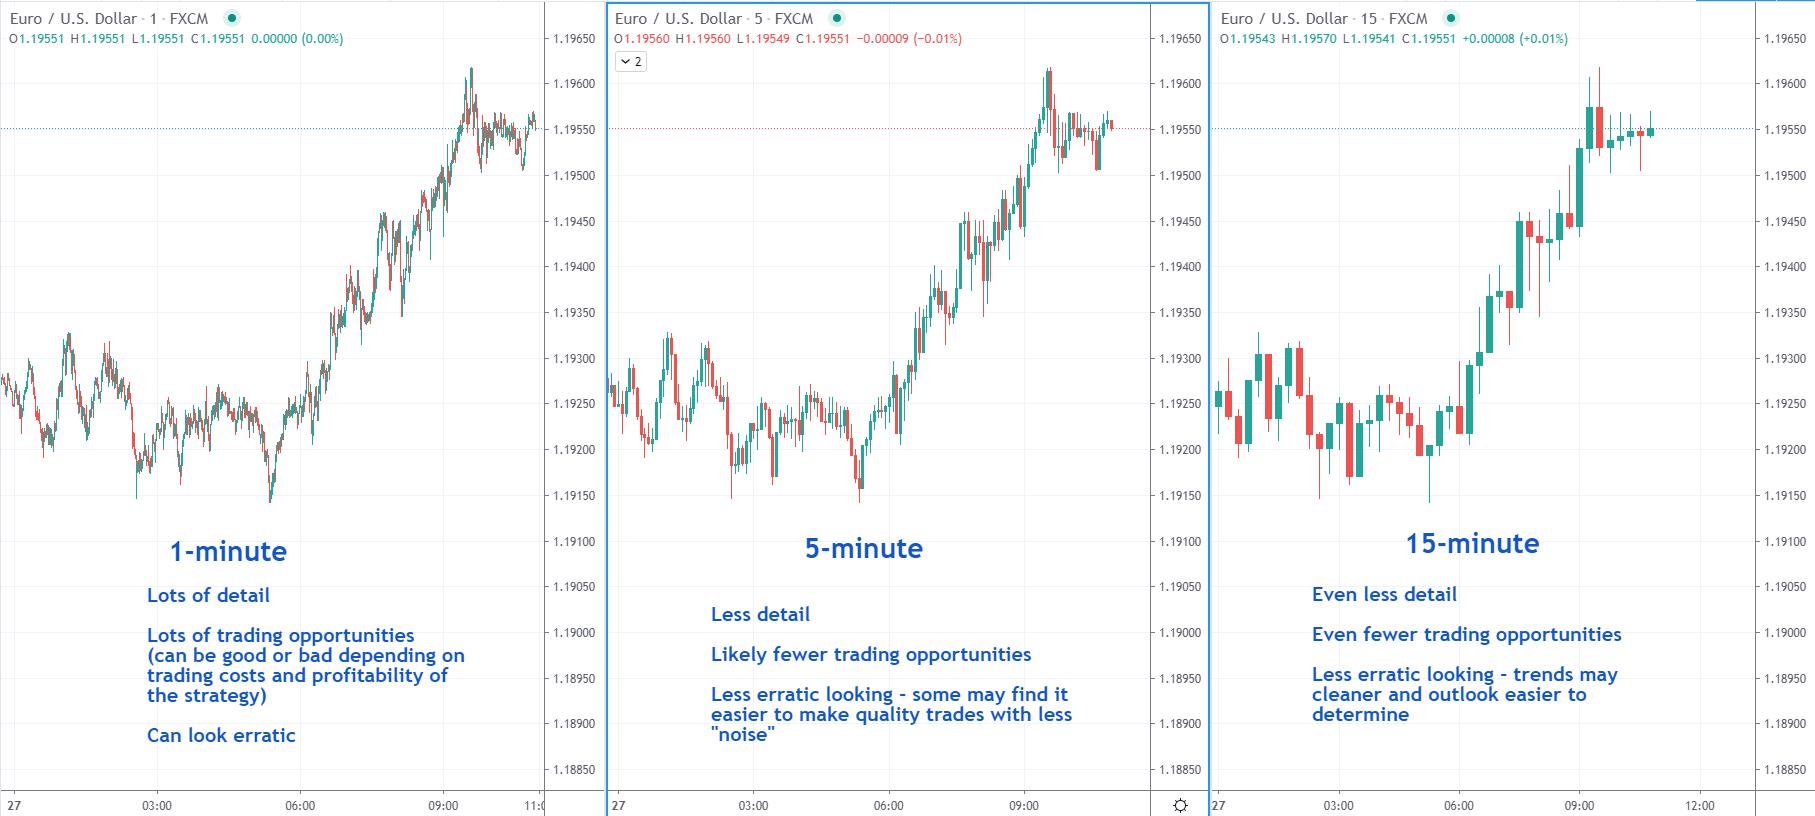 time frame comparison for day trading. 1-minute, 5-minute, and 15-minute time frames EURUSD